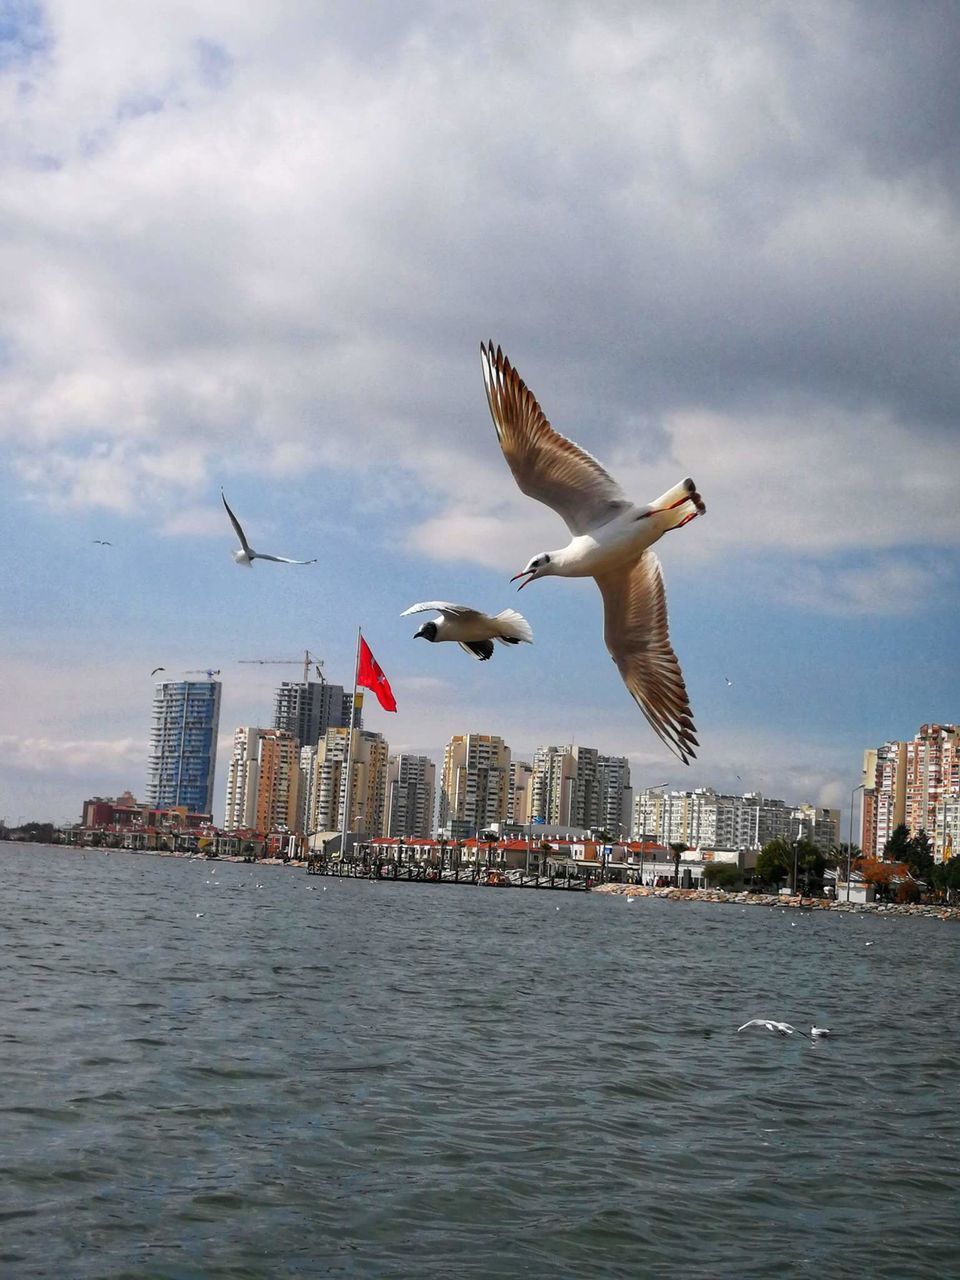 flying, mid-air, animal themes, spread wings, waterfront, city, sea, animals in the wild, water, bird, cloud - sky, seagull, sky, skyscraper, day, architecture, no people, cityscape, nature, built structure, building exterior, outdoors, animal wildlife, motion, urban skyline